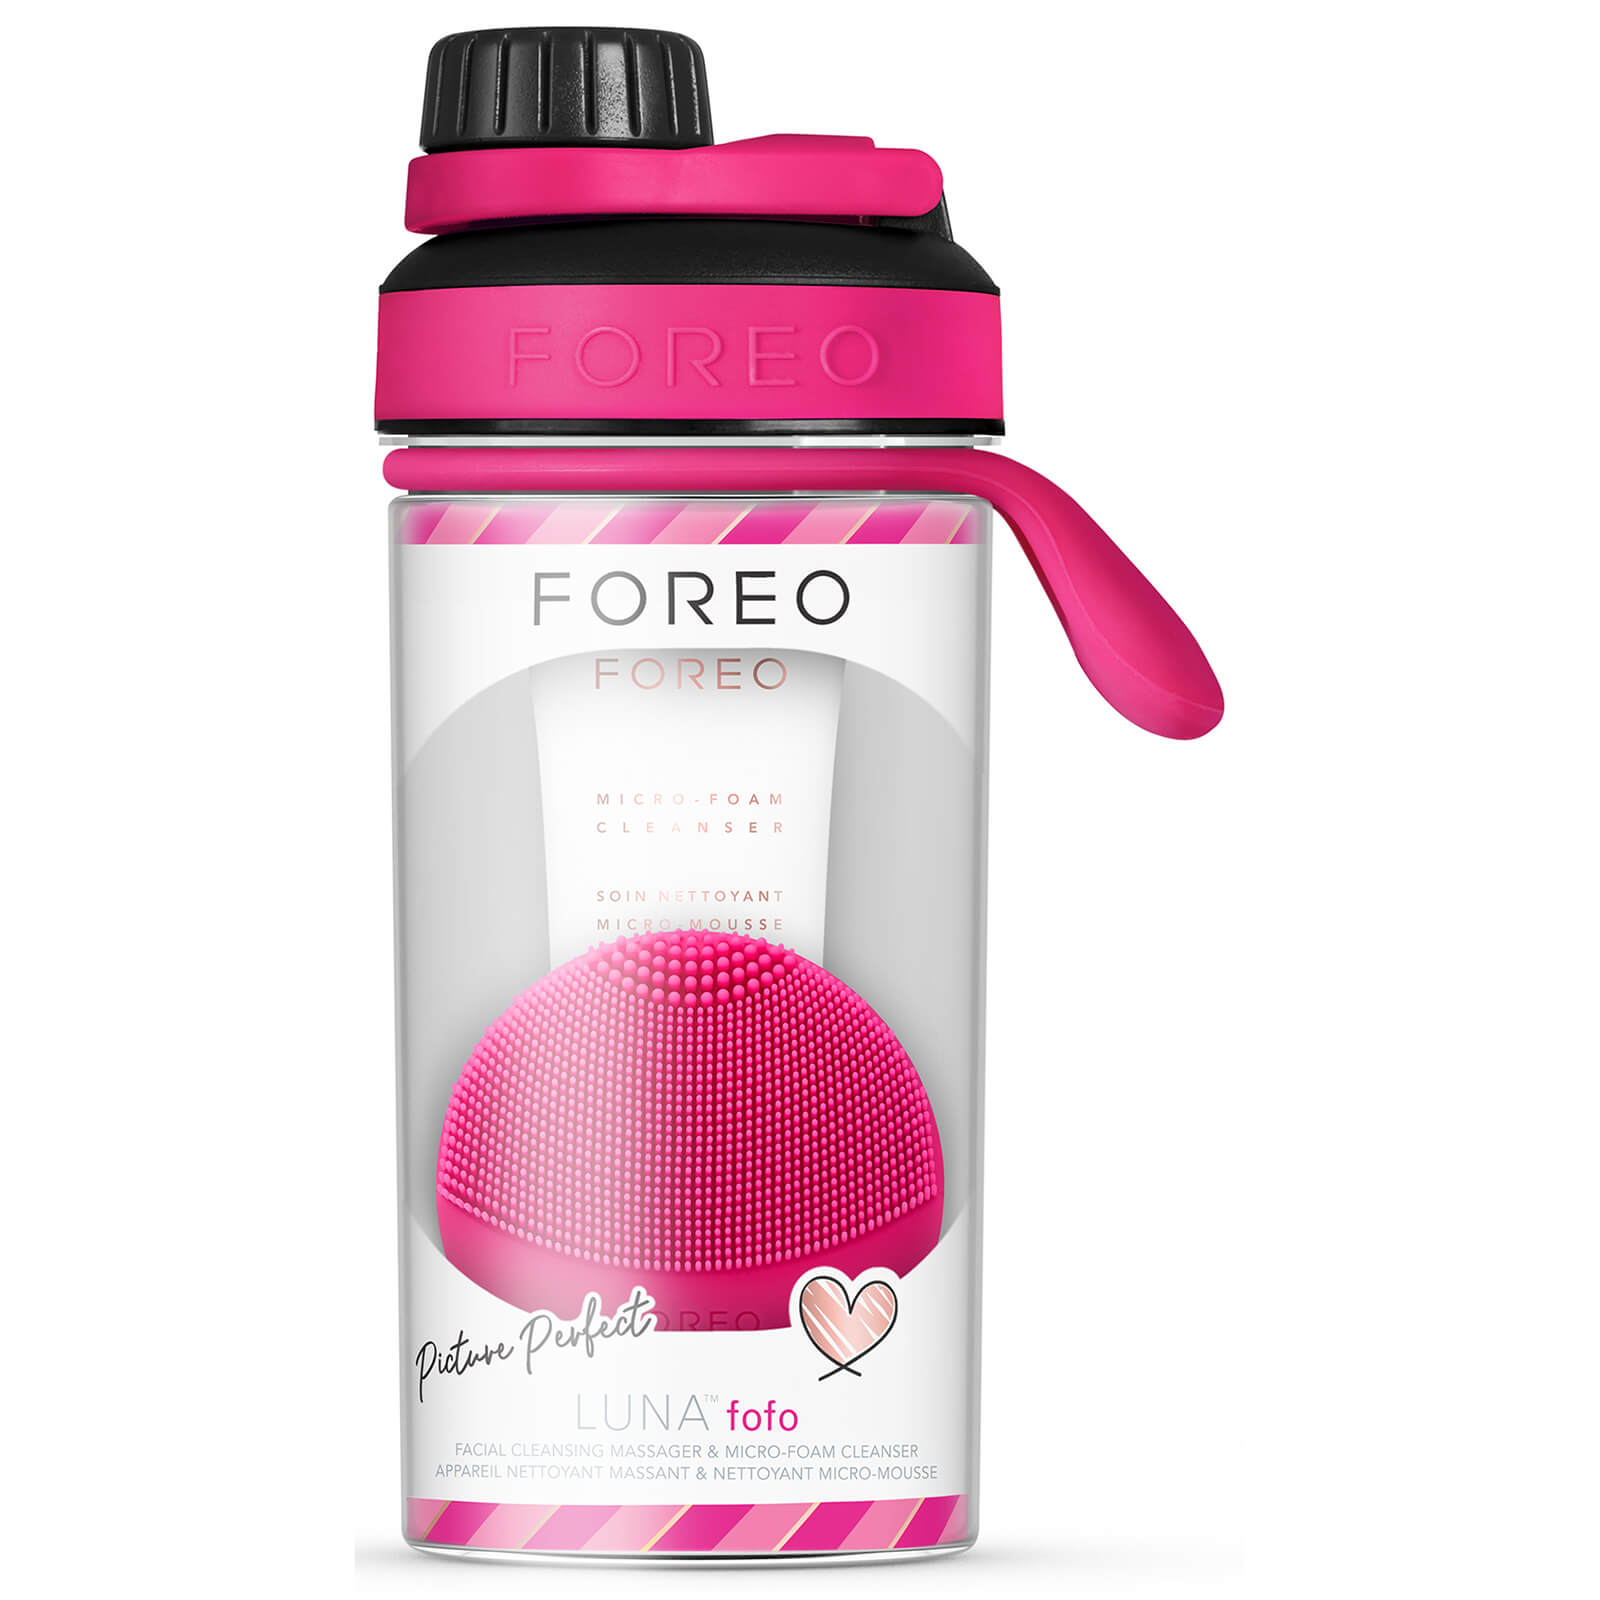 FOREO Picture Perfect Set LUNA fofo and Cleanser 20ml